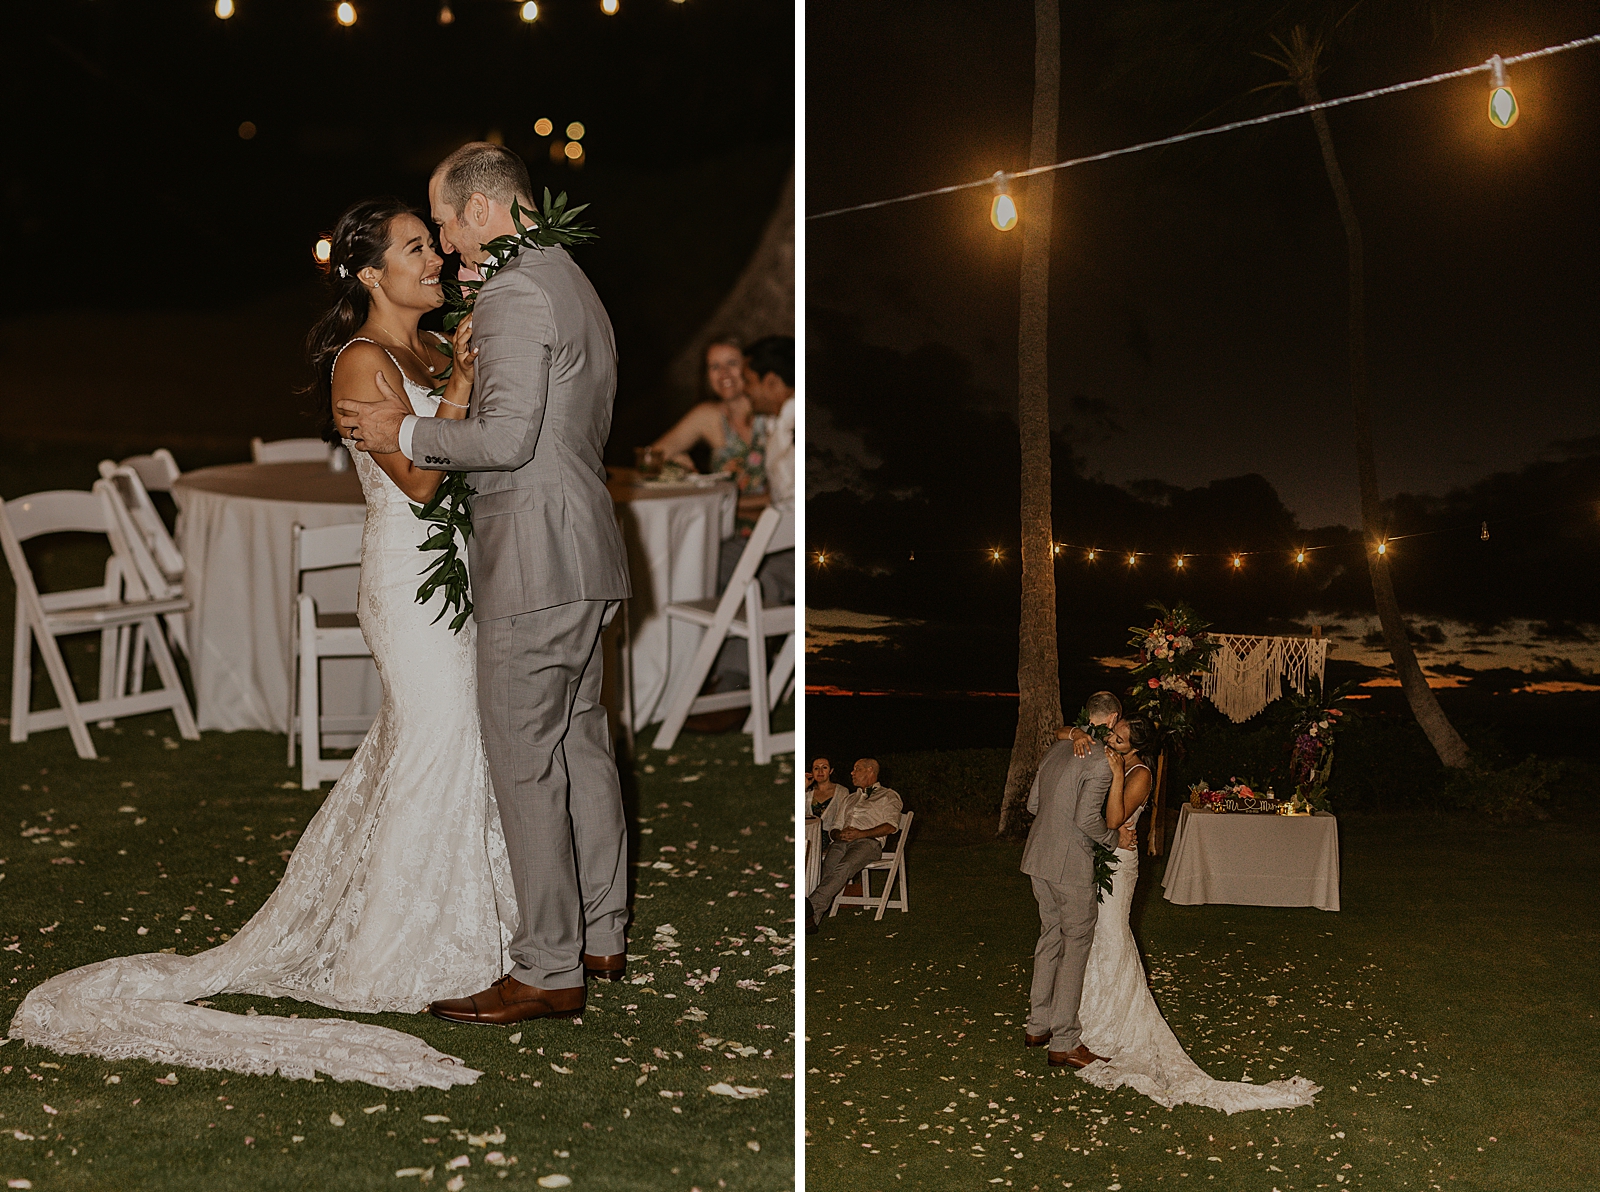 Bride and Groom outdoor first dance at night